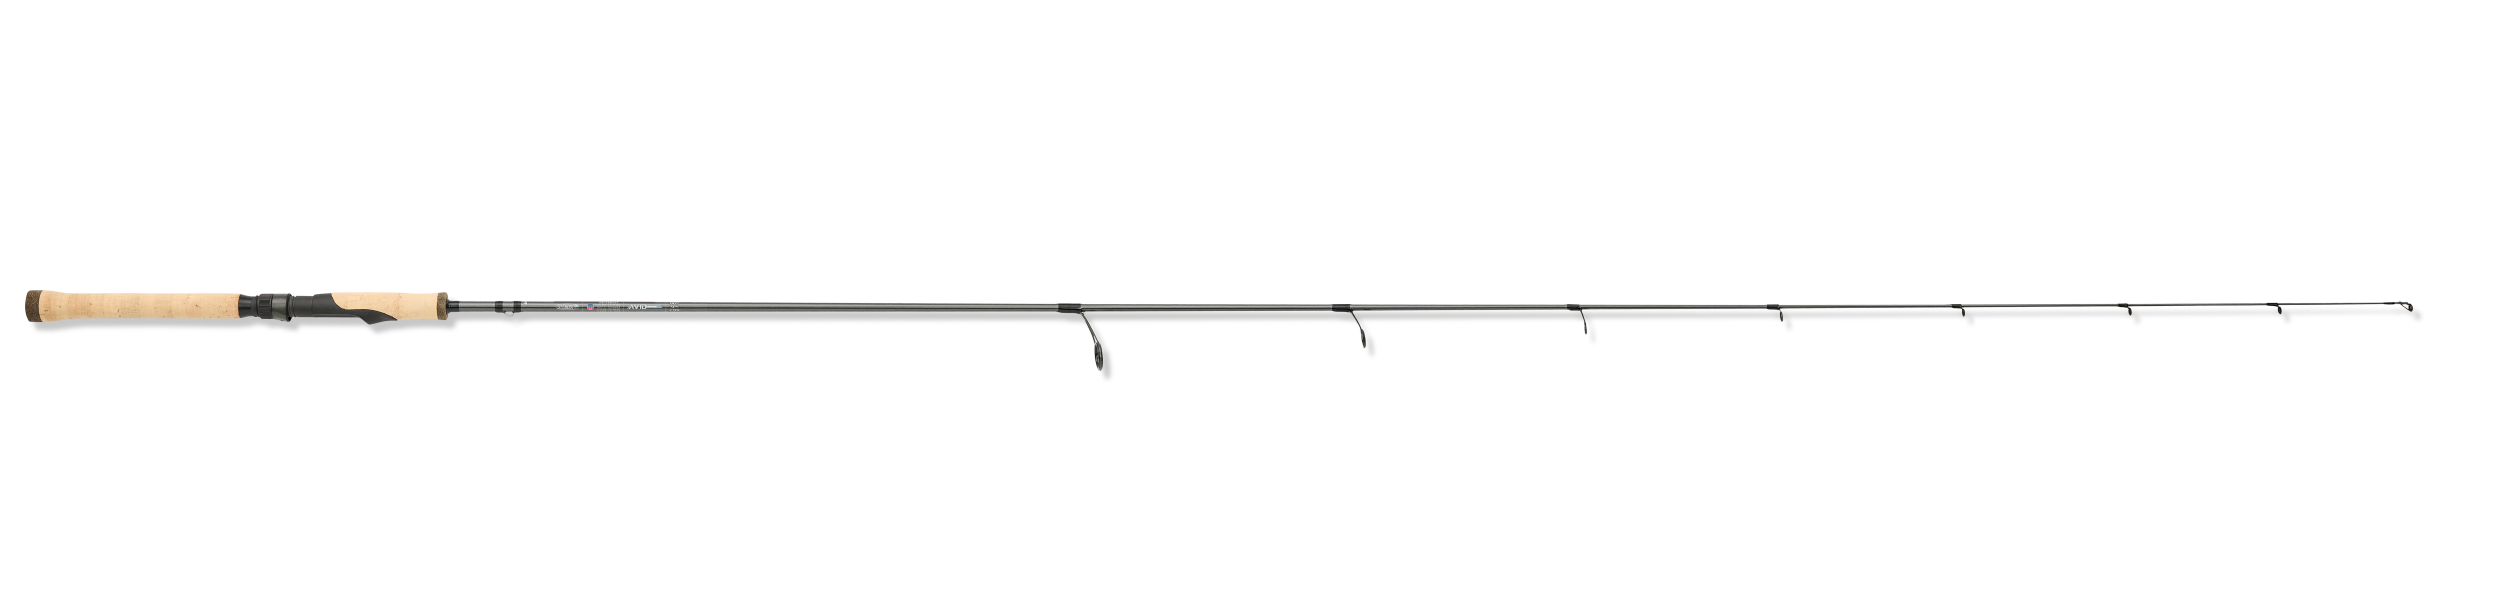 St Croix Avid Walleye Spinning Rod - Gagnon Sporting Goods